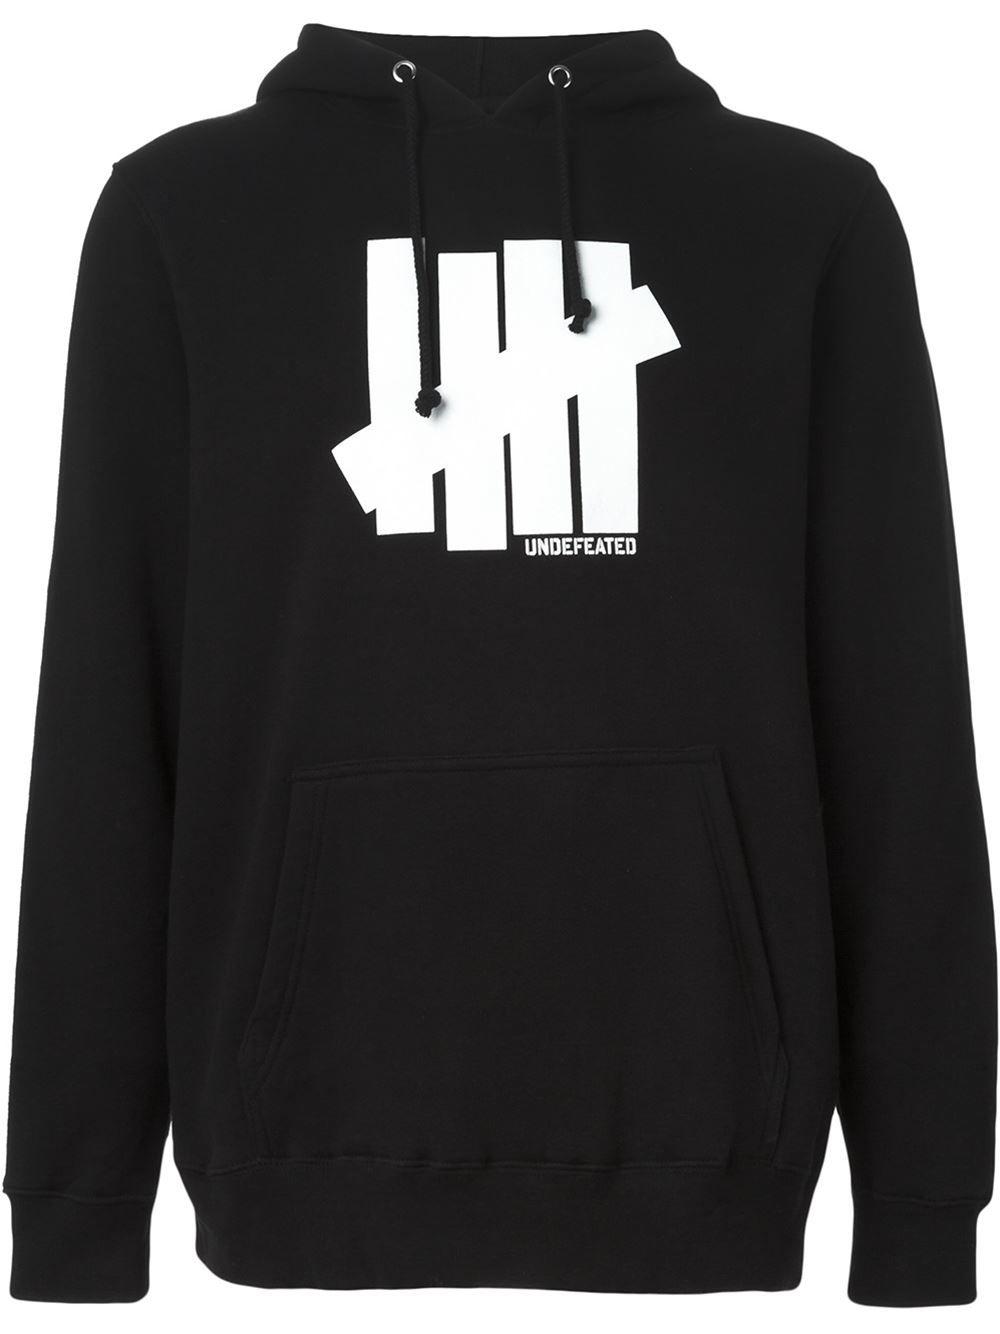 Undefeated Clothing Logo - Undefeated Logo Print Hoodie in Black for Men